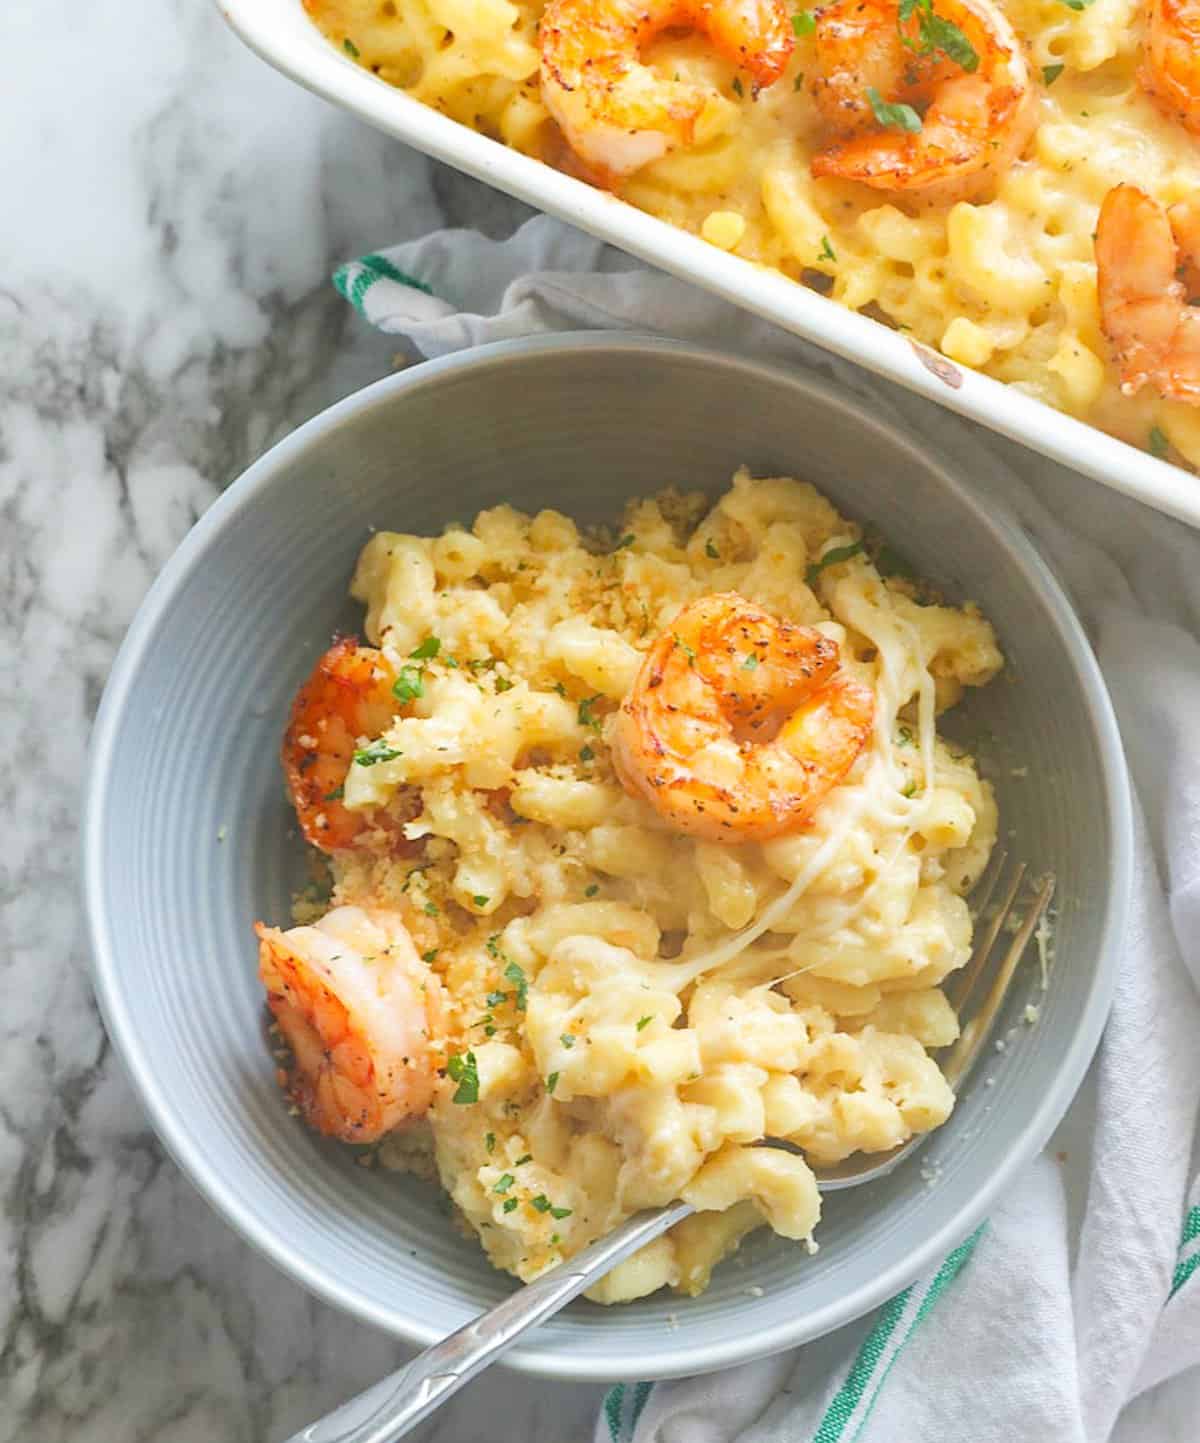 Decadent and cheesy shrimp mac and cheese for an elegant yet fast weeknight dinner